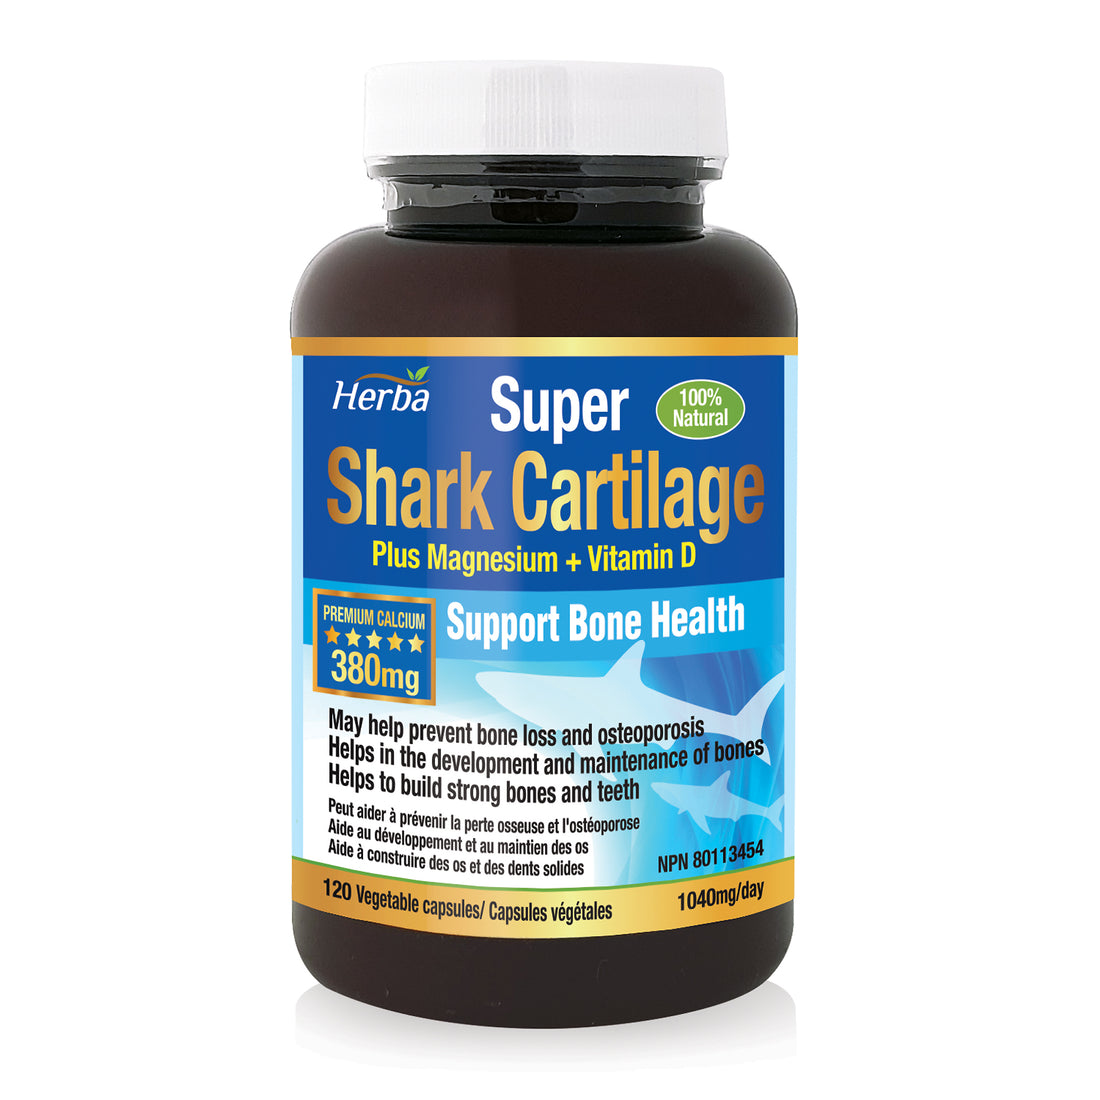 Herba Shark Cartilage Capsules - 120 Capsules | 1,500mg Per Day | Shark Cartilage Supplement for Joints with Magnesium and Vitamin D3